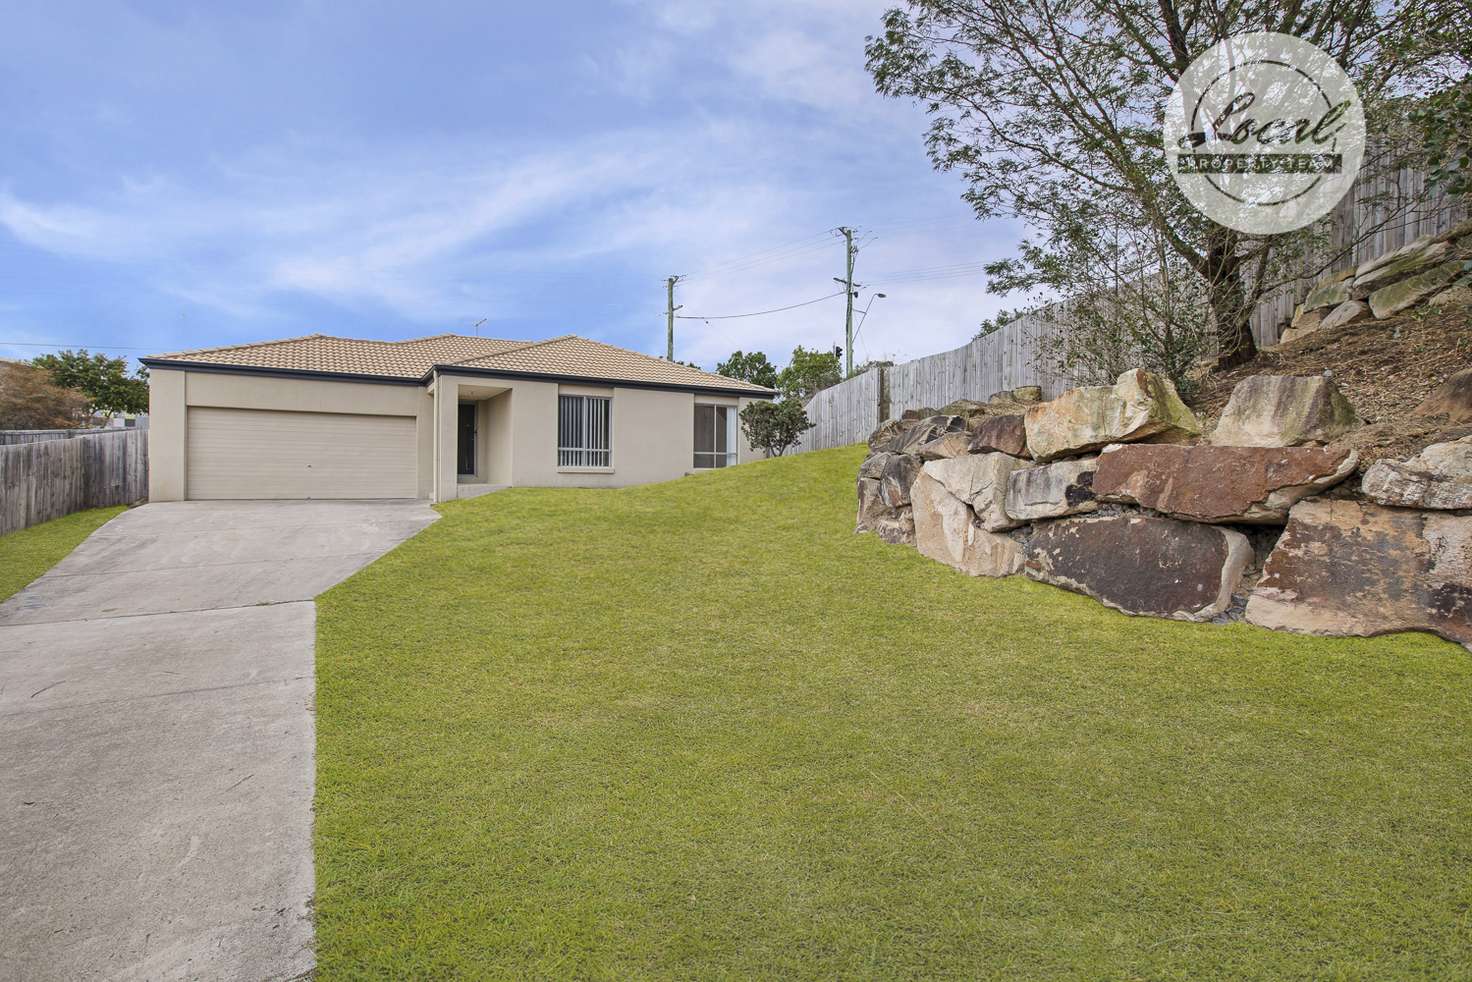 Main view of Homely house listing, 20 Borrowdale Ct, Brassall QLD 4305